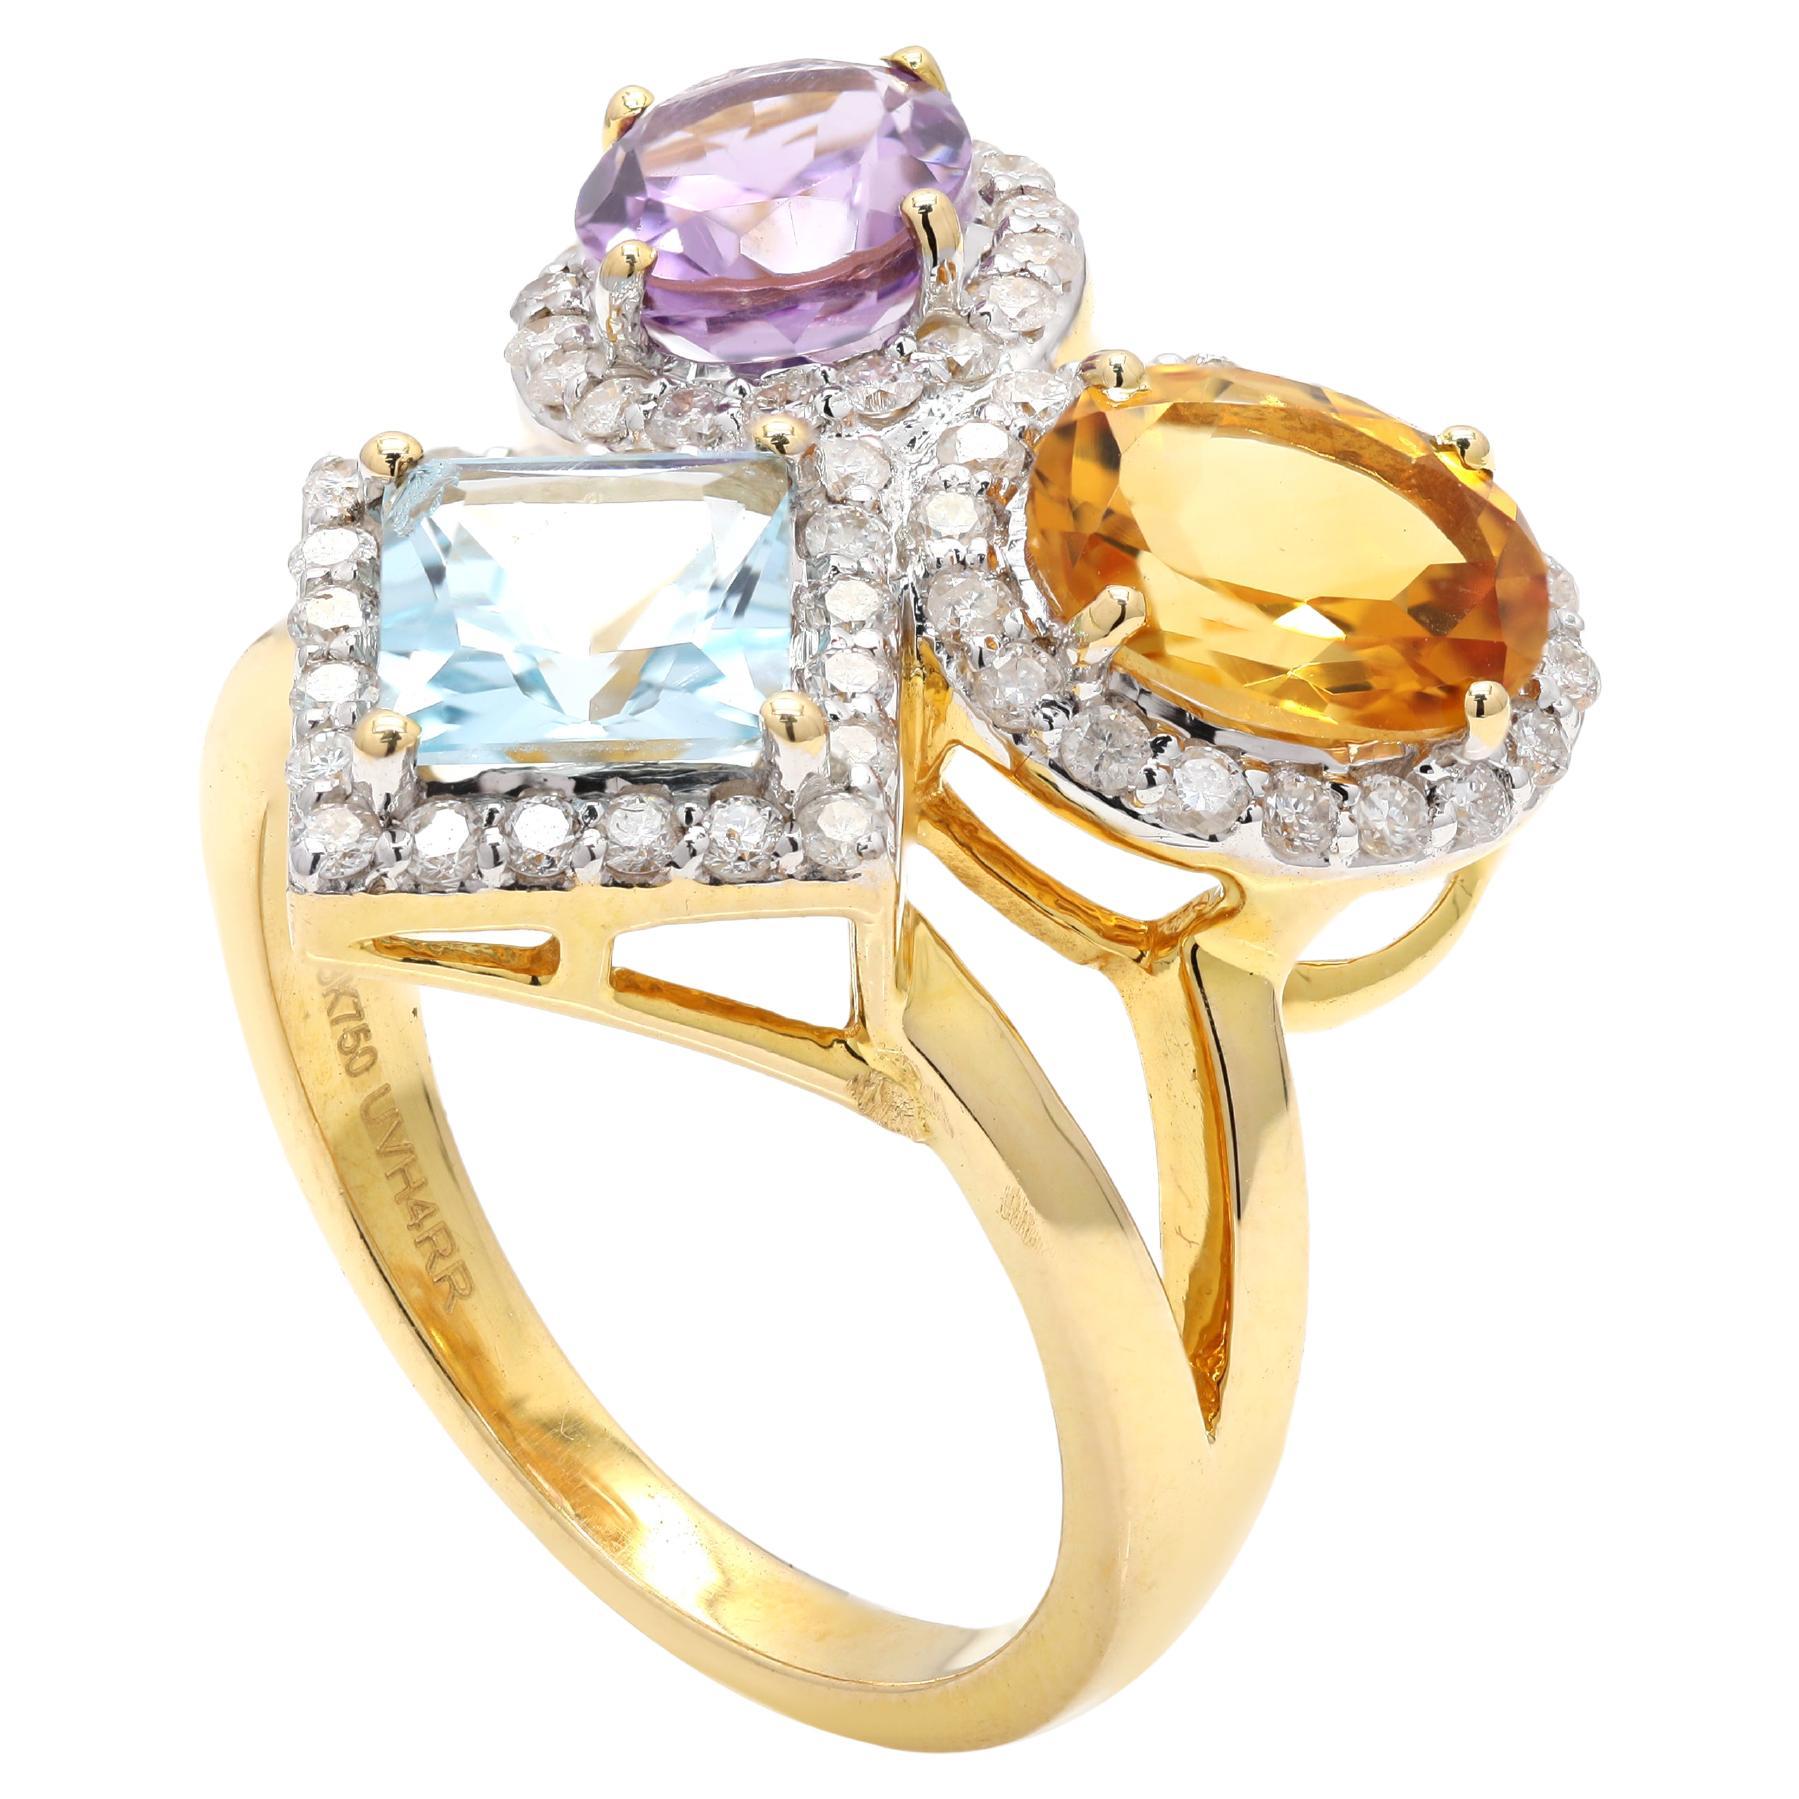 Statement 7.23ct Semi Precious Cocktail Ring in 18k Yellow Gold with Diamonds